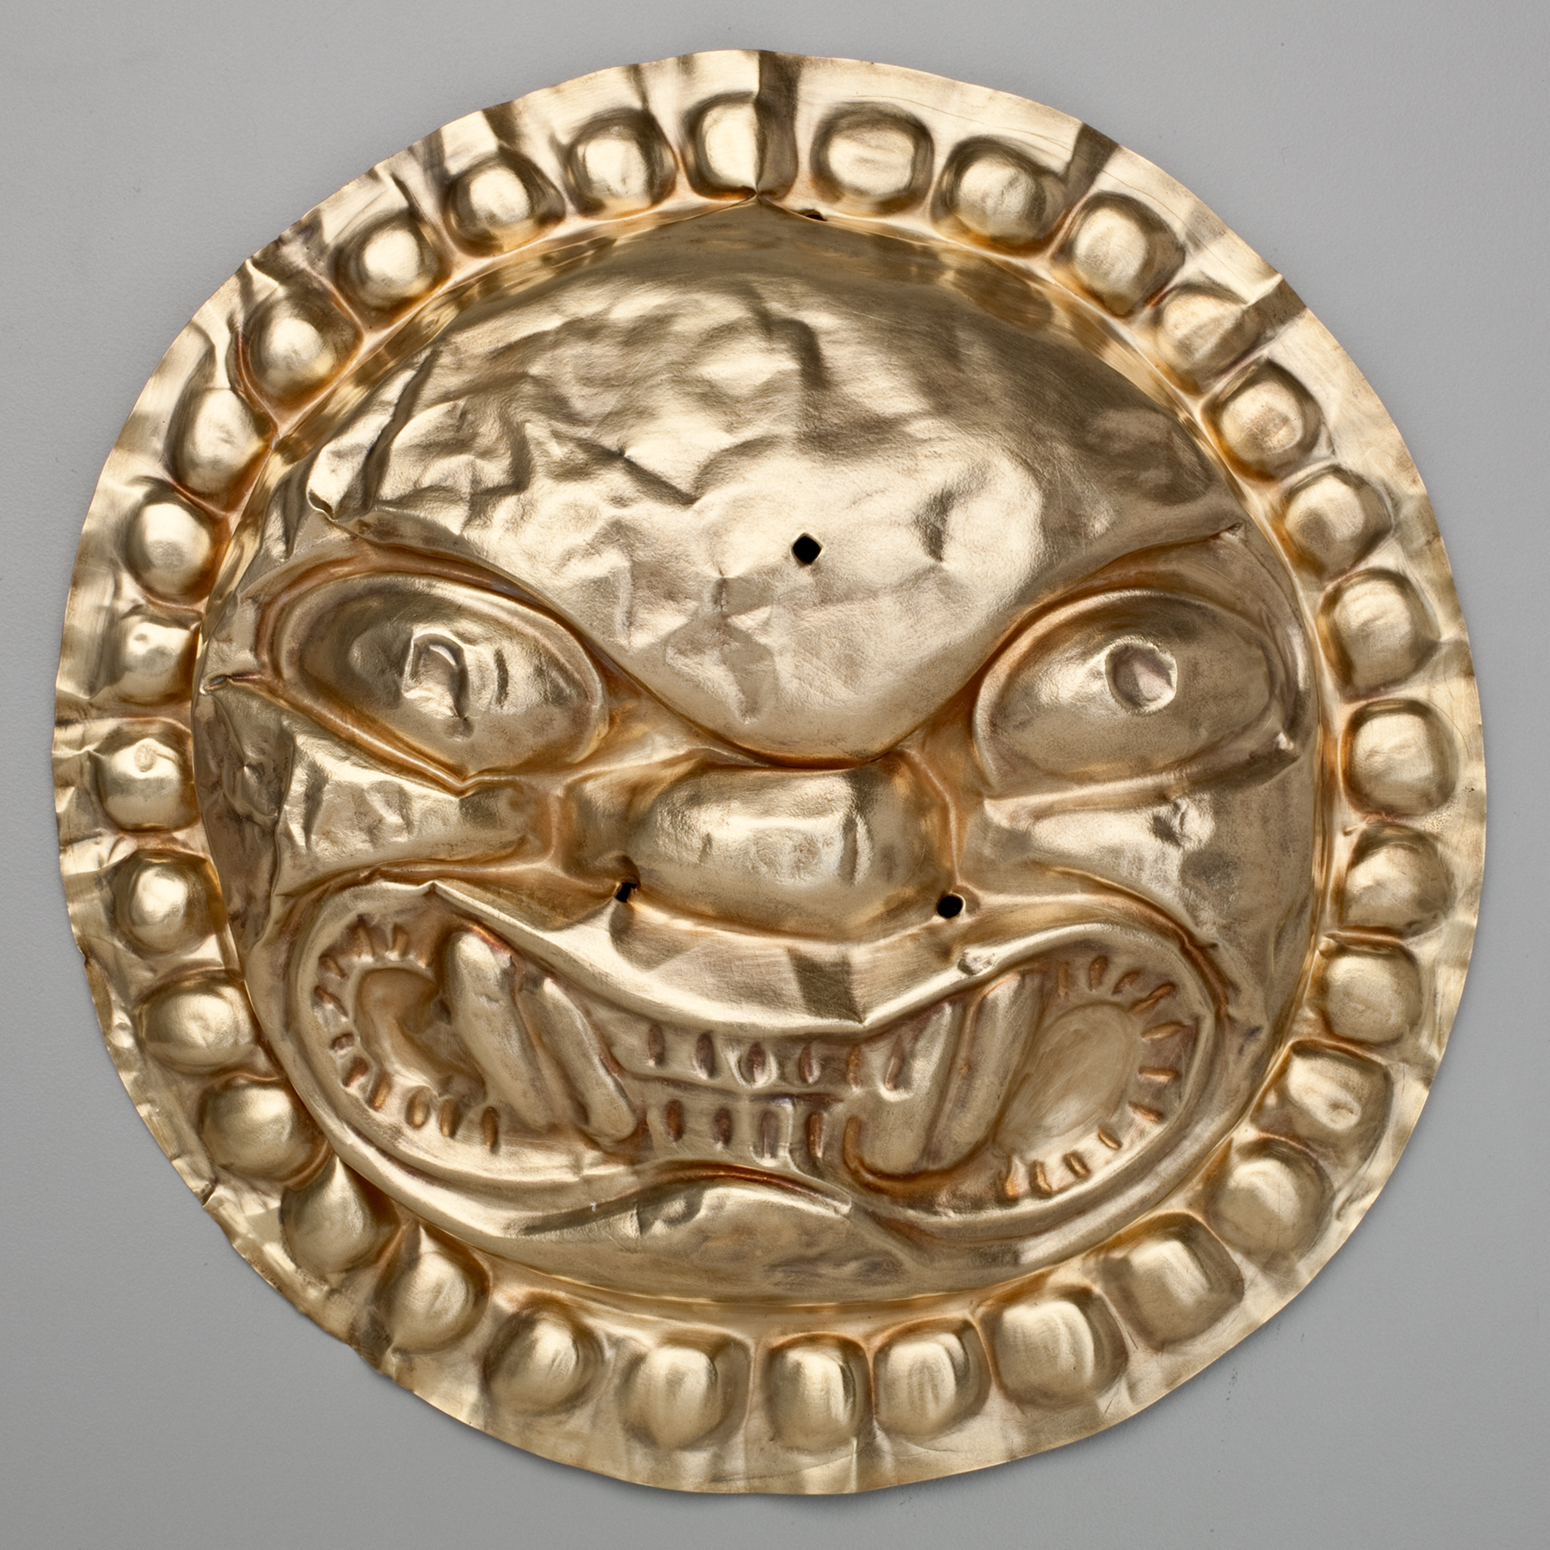 A gold circle with a snarling feline face